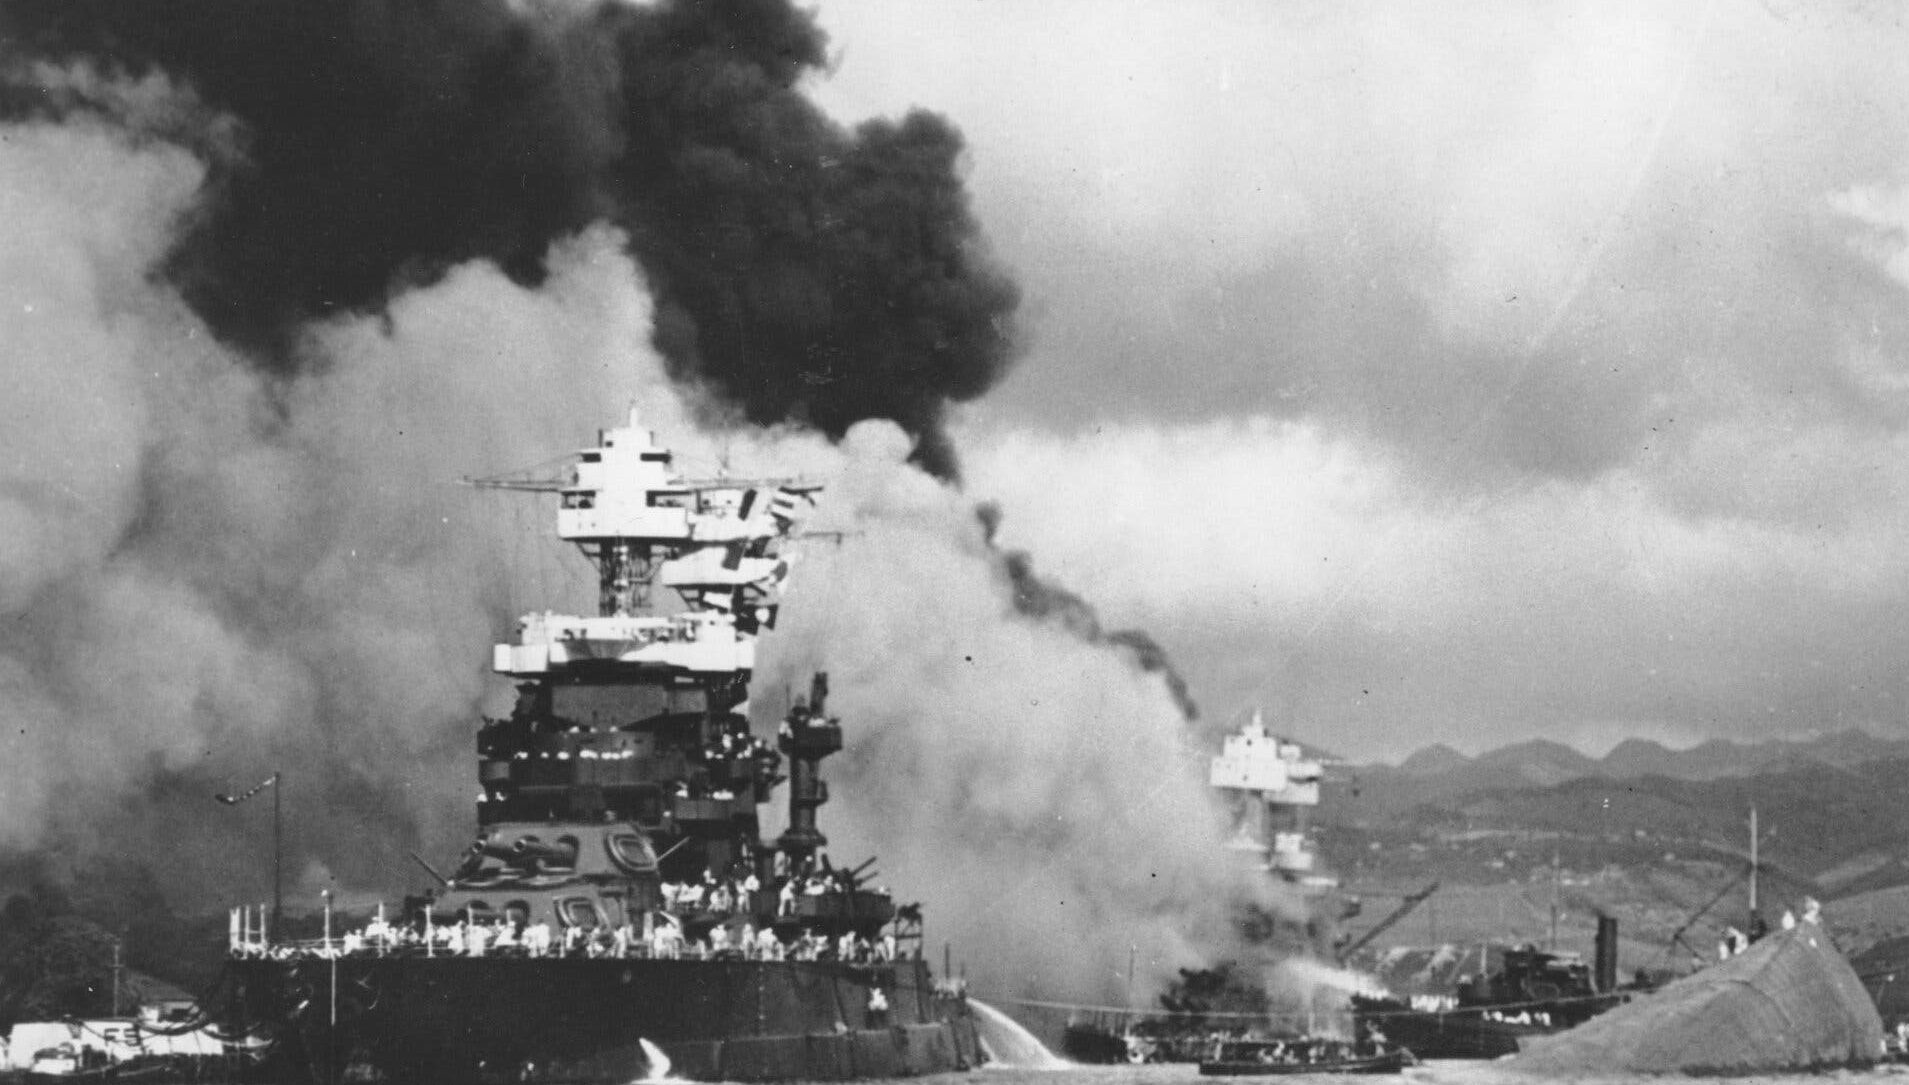 Pearl Harbor Remembered 80 years ago